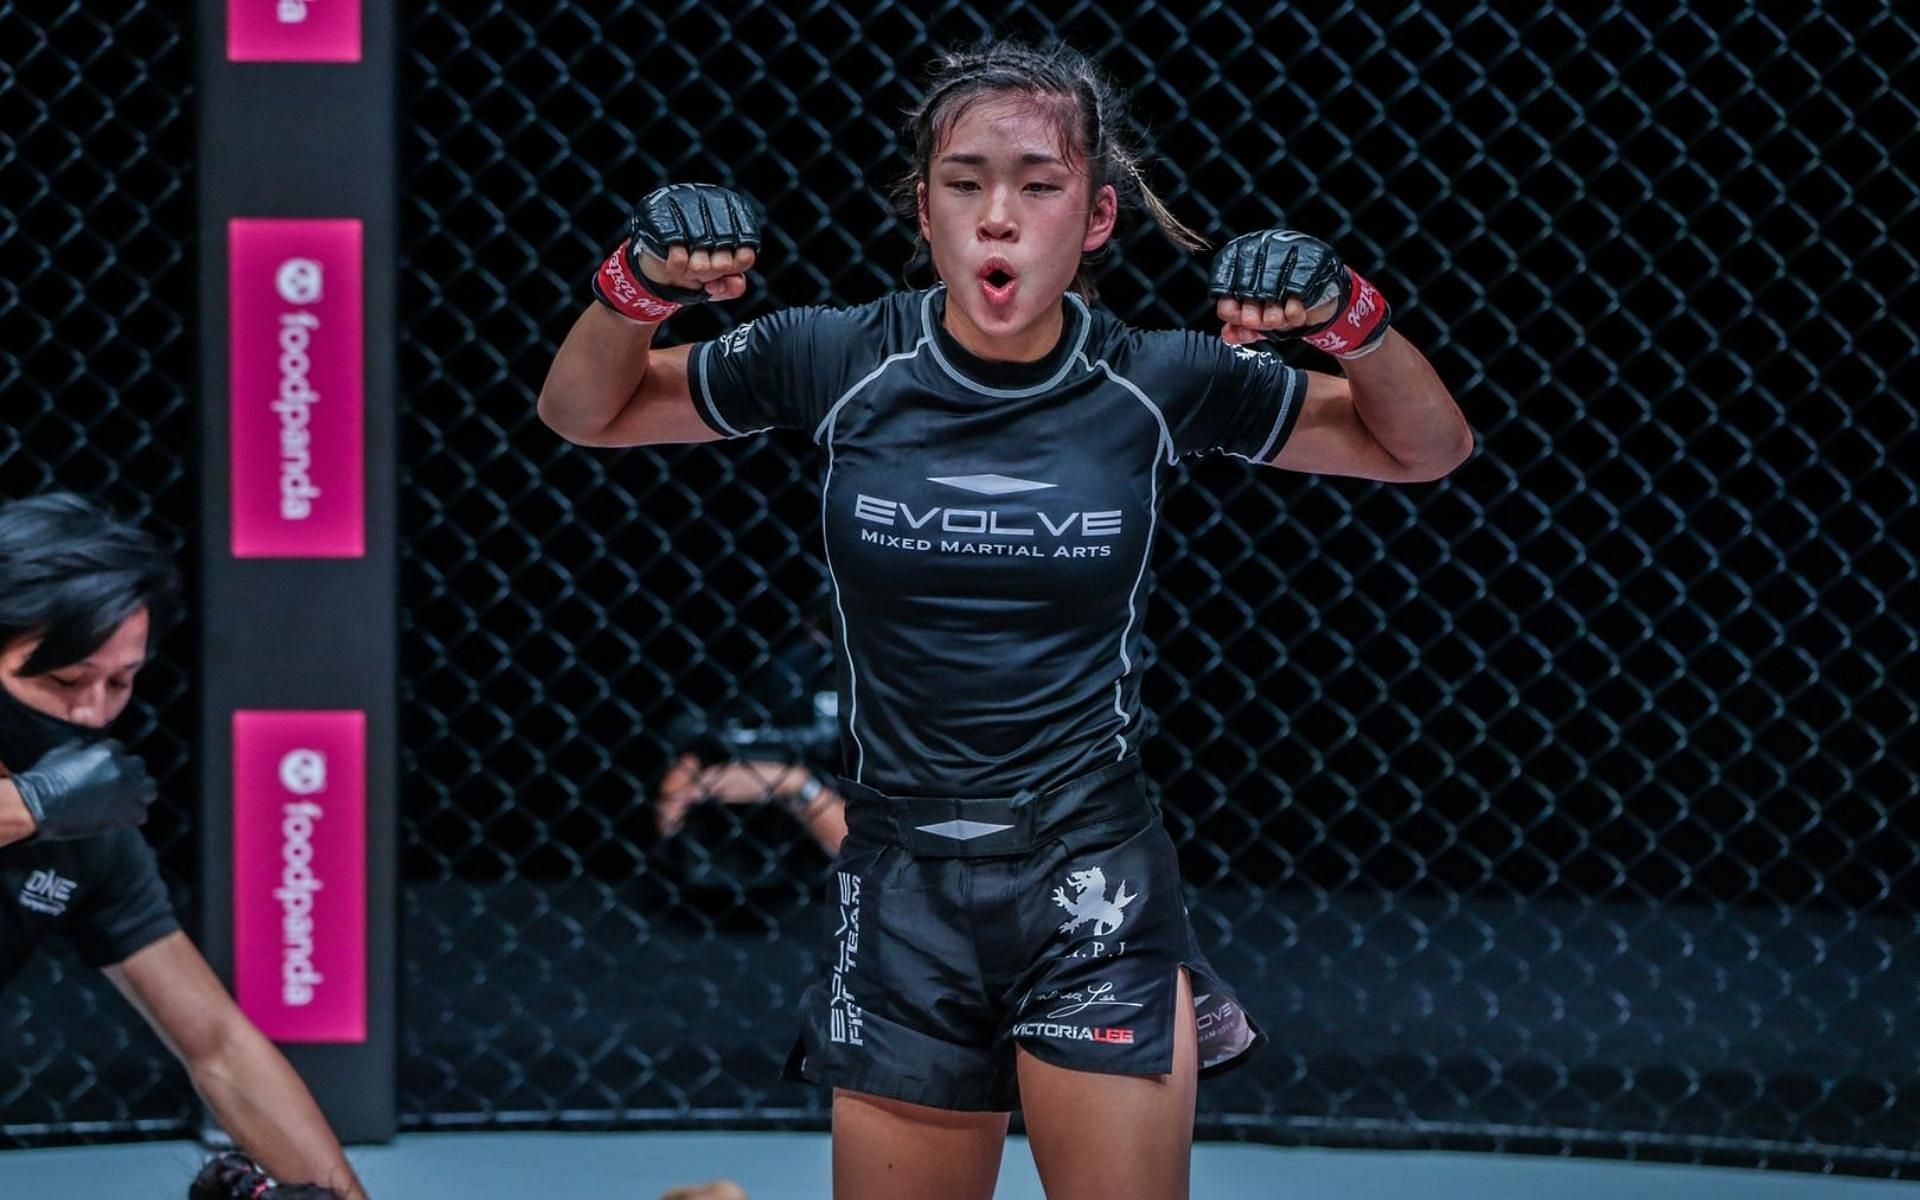 17-year-old Victoria Lee is one of the most promising MMA prospects today. (Image courtesy of ONE Championship)